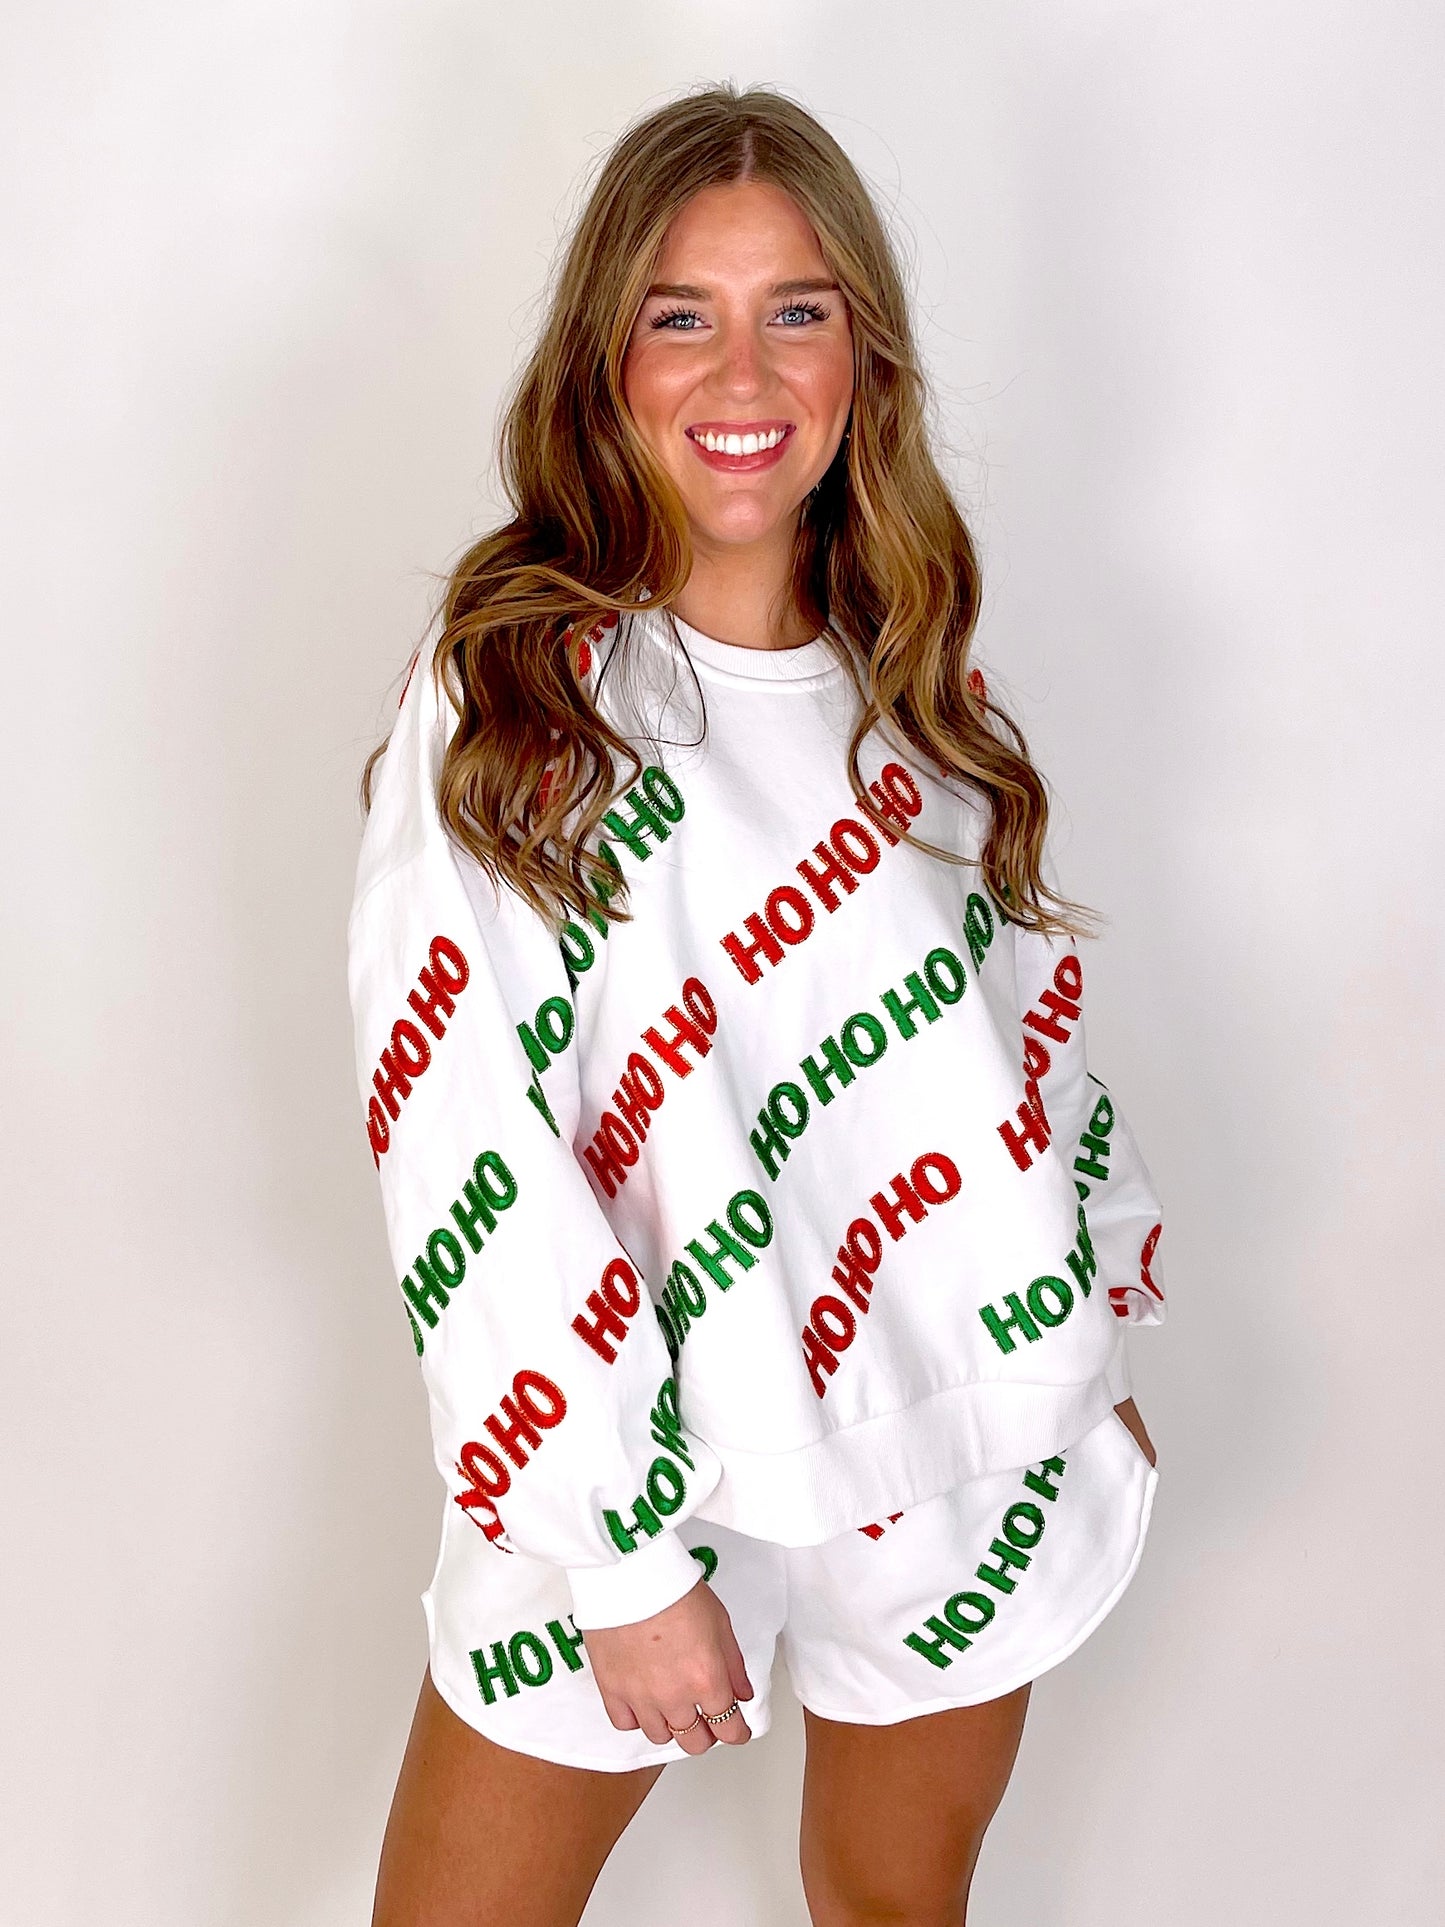 Ho Ho Ho Sweatshirt | Queen of Sparkles-Sweatshirt-Queen of Sparkles-The Village Shoppe, Women’s Fashion Boutique, Shop Online and In Store - Located in Muscle Shoals, AL.